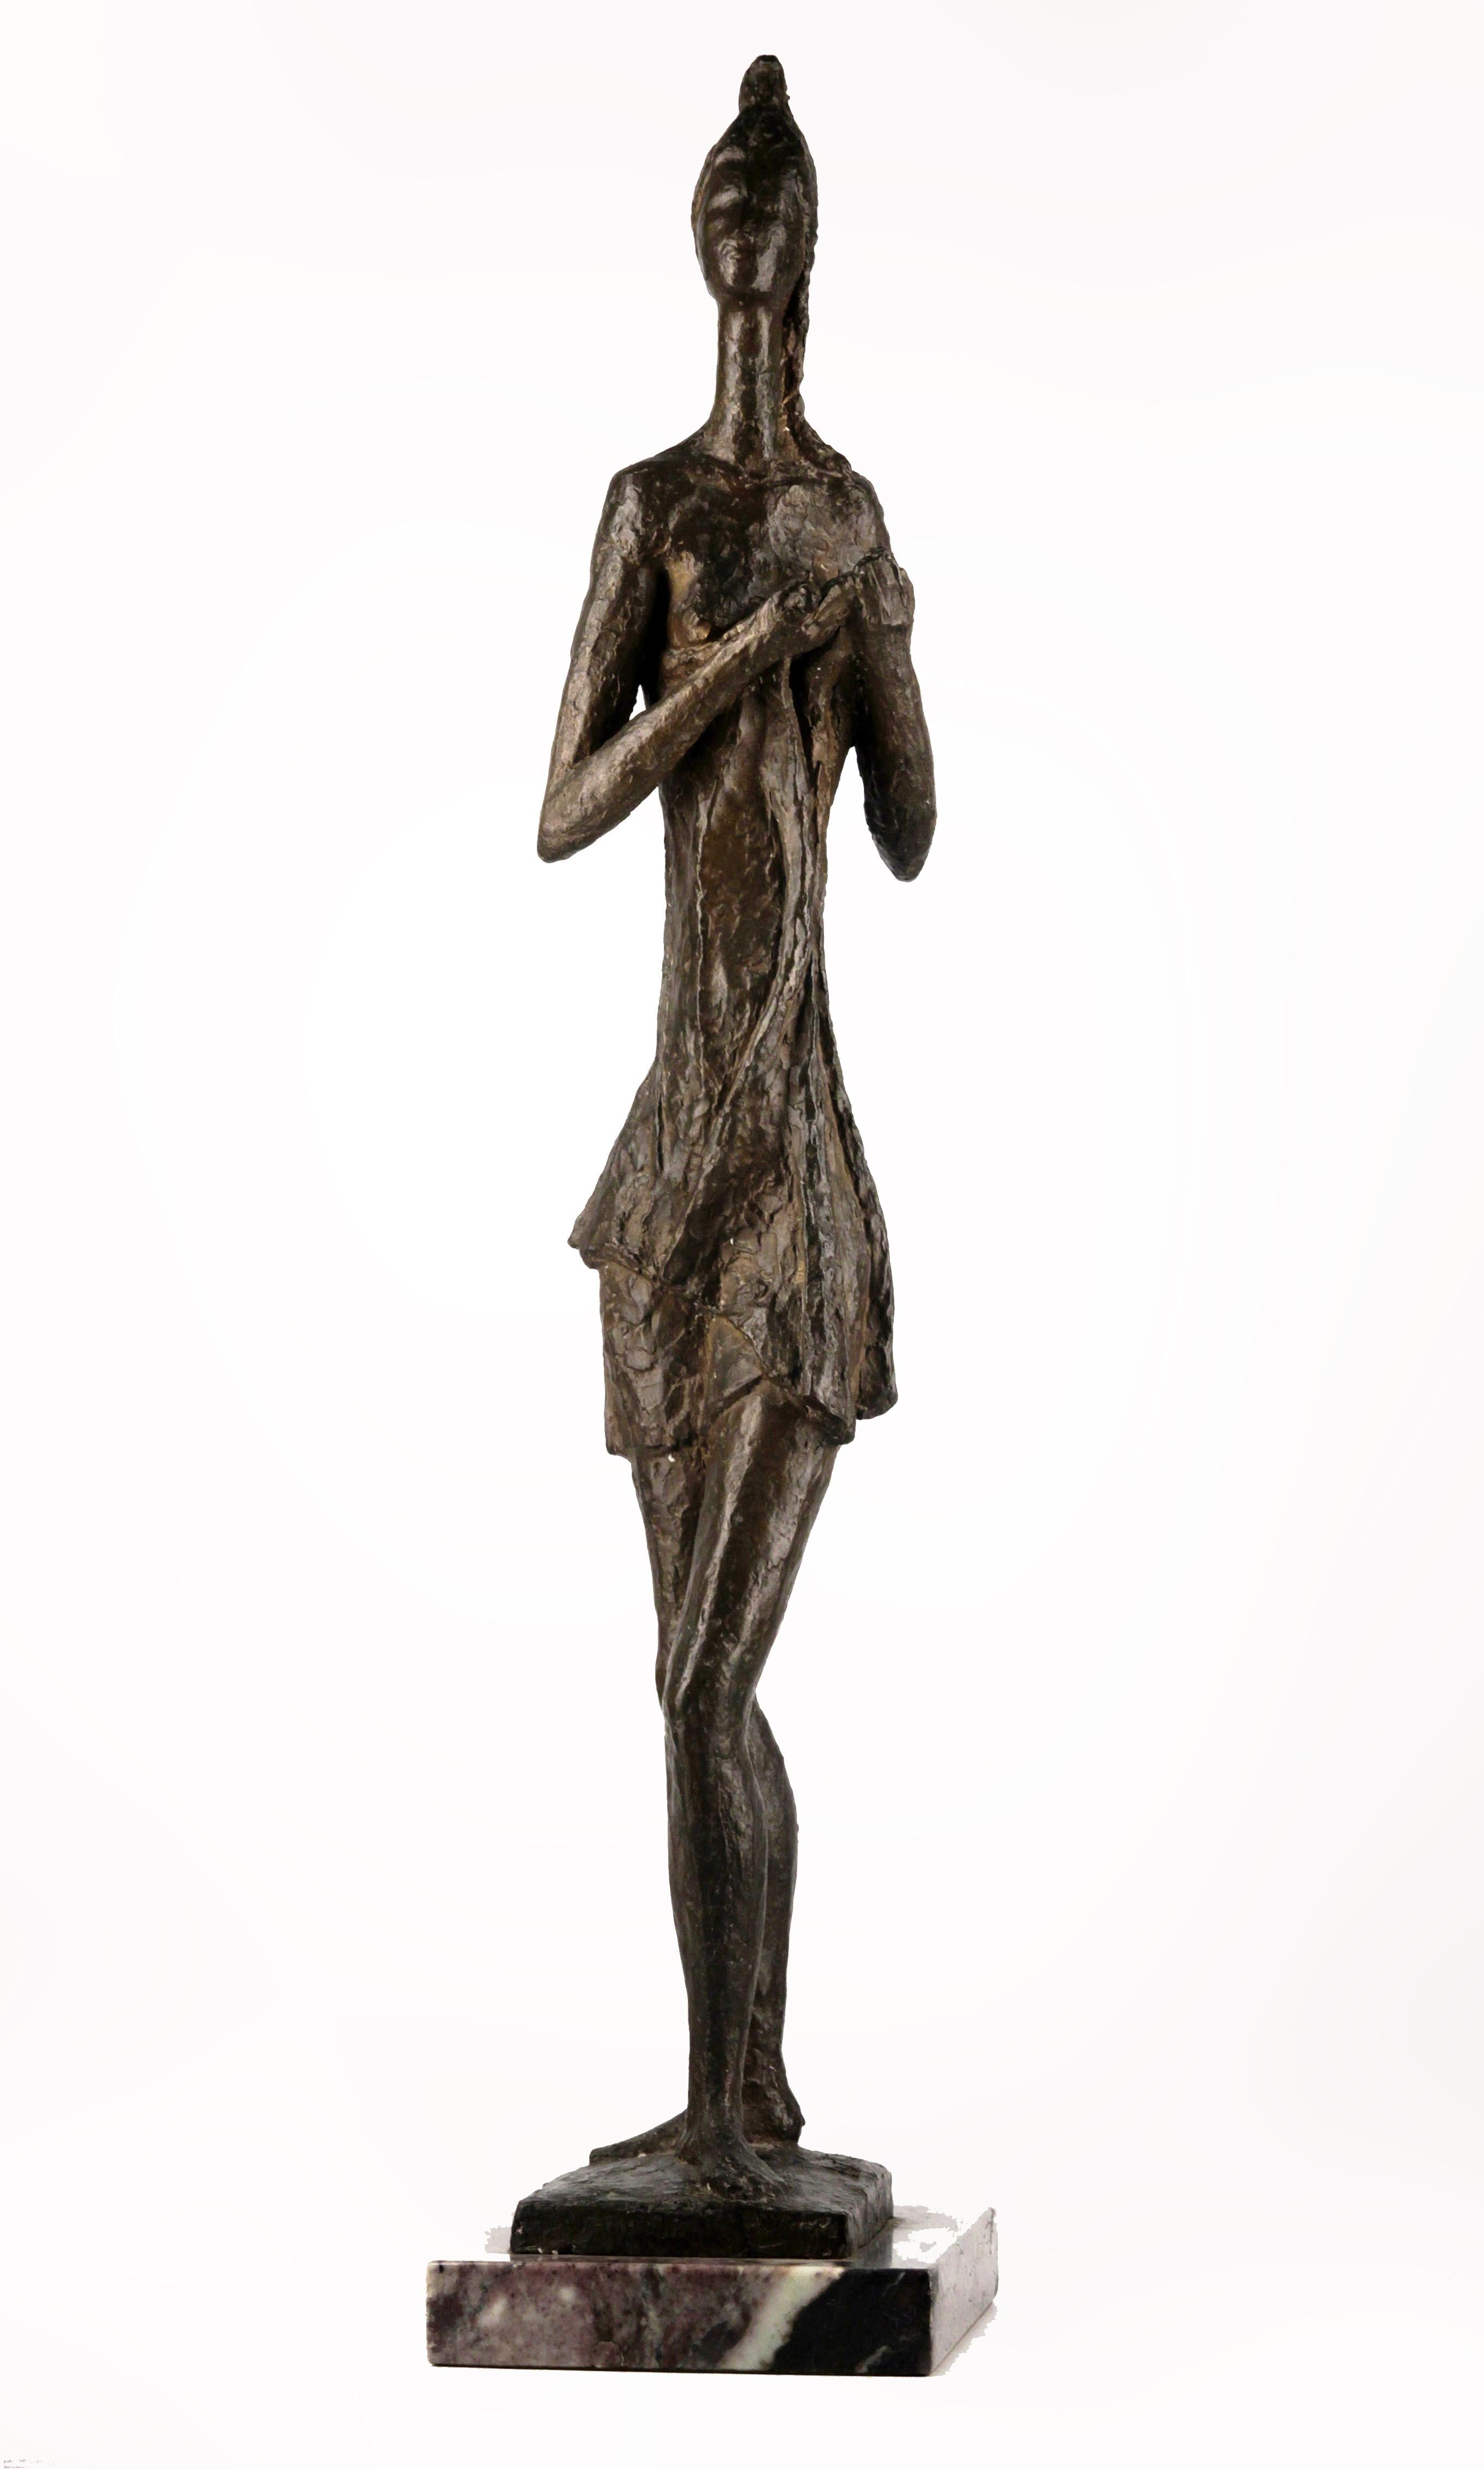 Early 20th century Expressionist patinated bronze woman sculpture with marble base signed by italian sculptor A. Monti

By: A. Monti
Material: bronze, marble, copper, metal
Technique: cast, patinated, polished, molded, metalwork
Dimensions: 7.5 in x